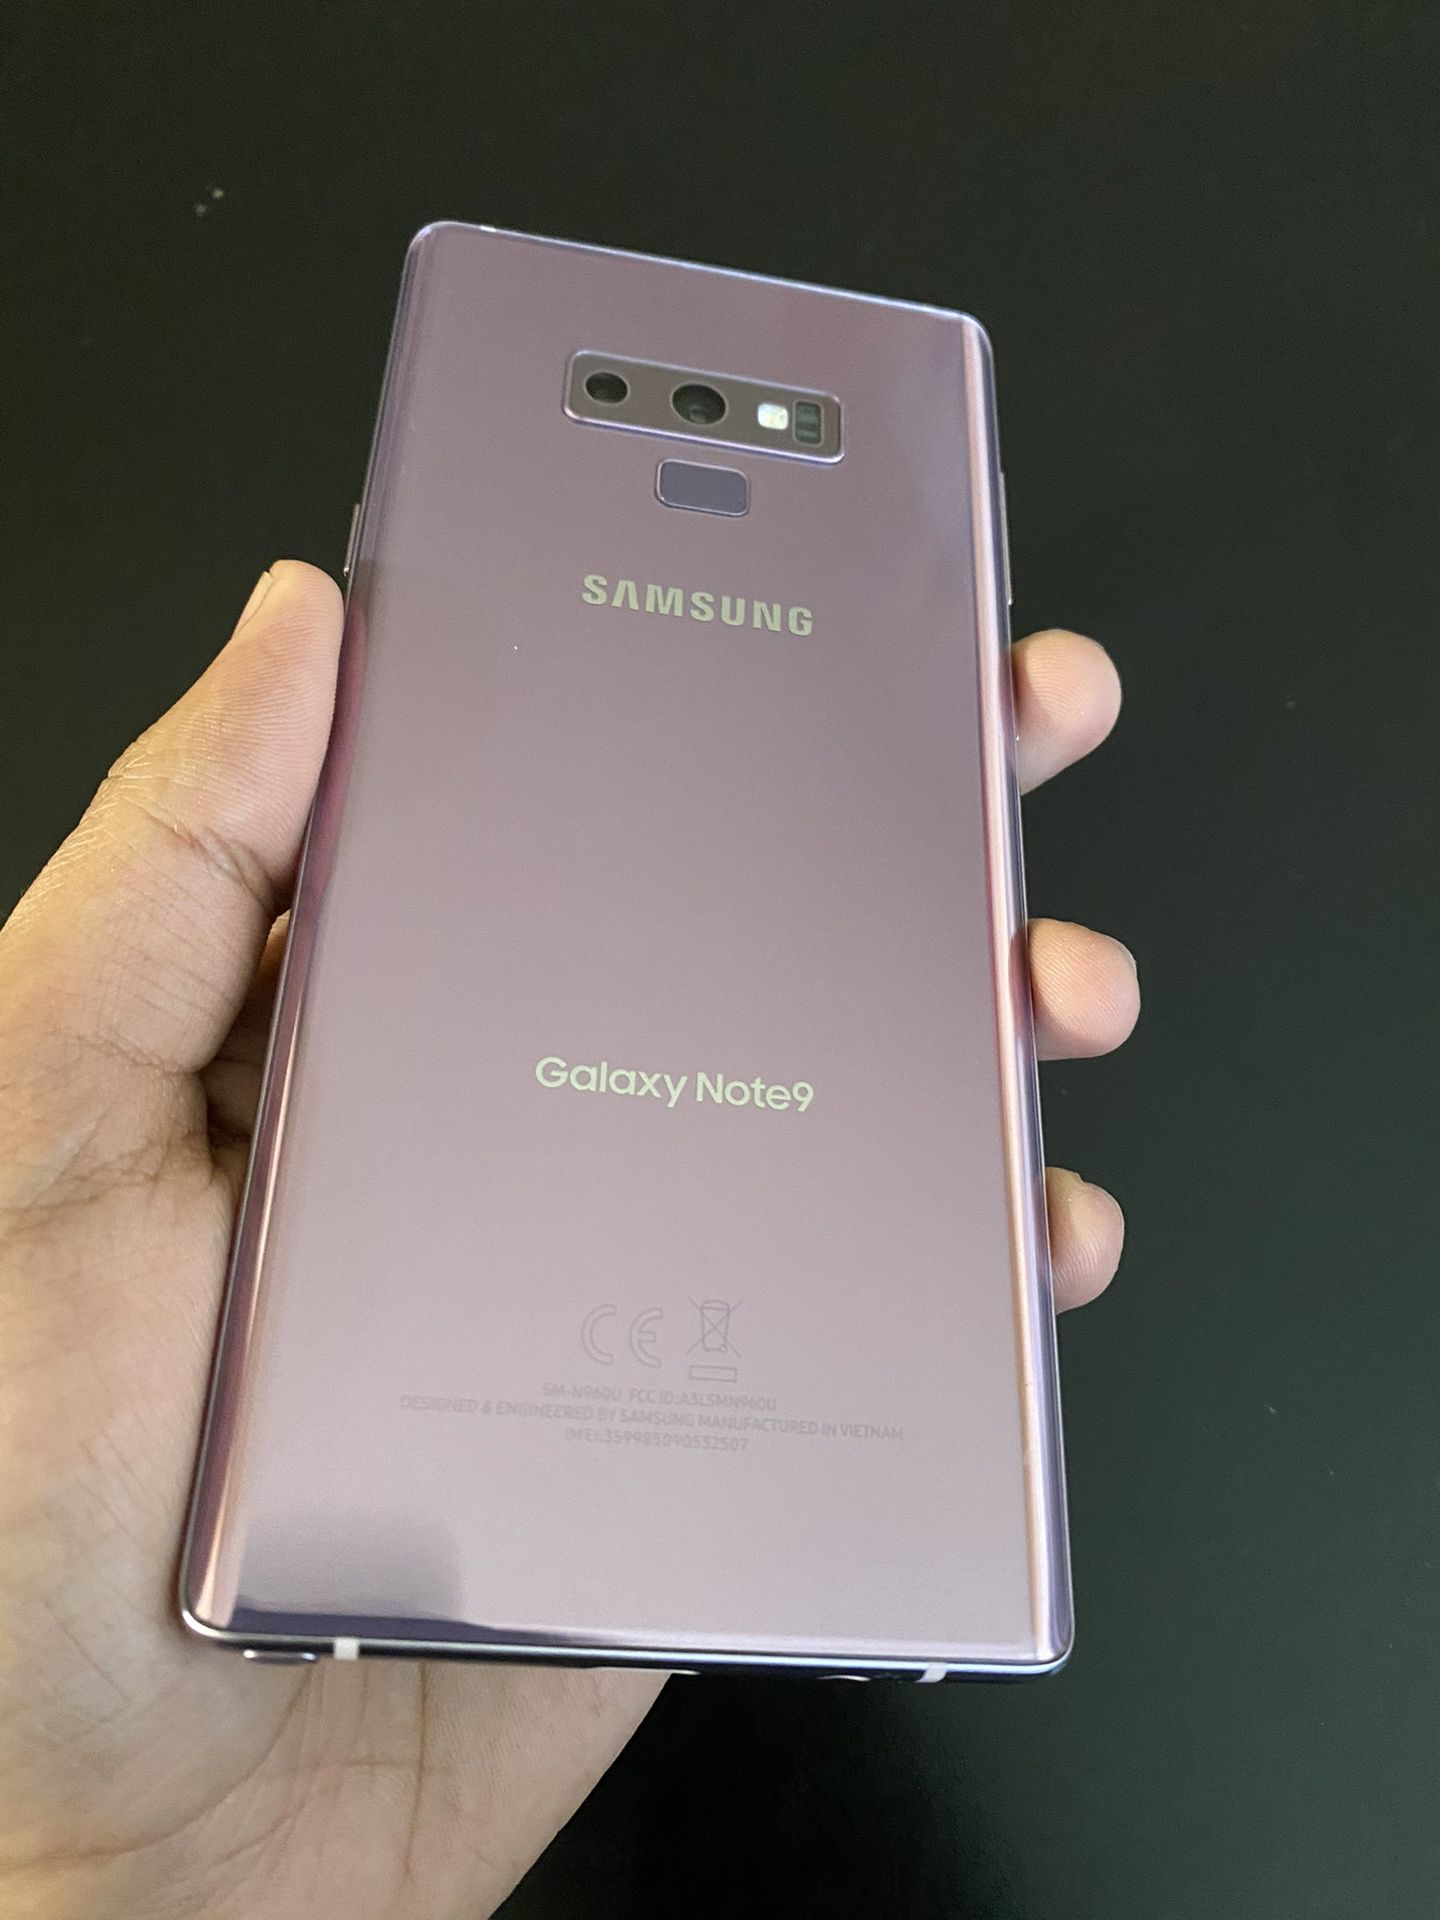 Samsung Galaxy Note 9, Purple, Unlocked, Excellent Condition, clean IMEI, 128 GBs